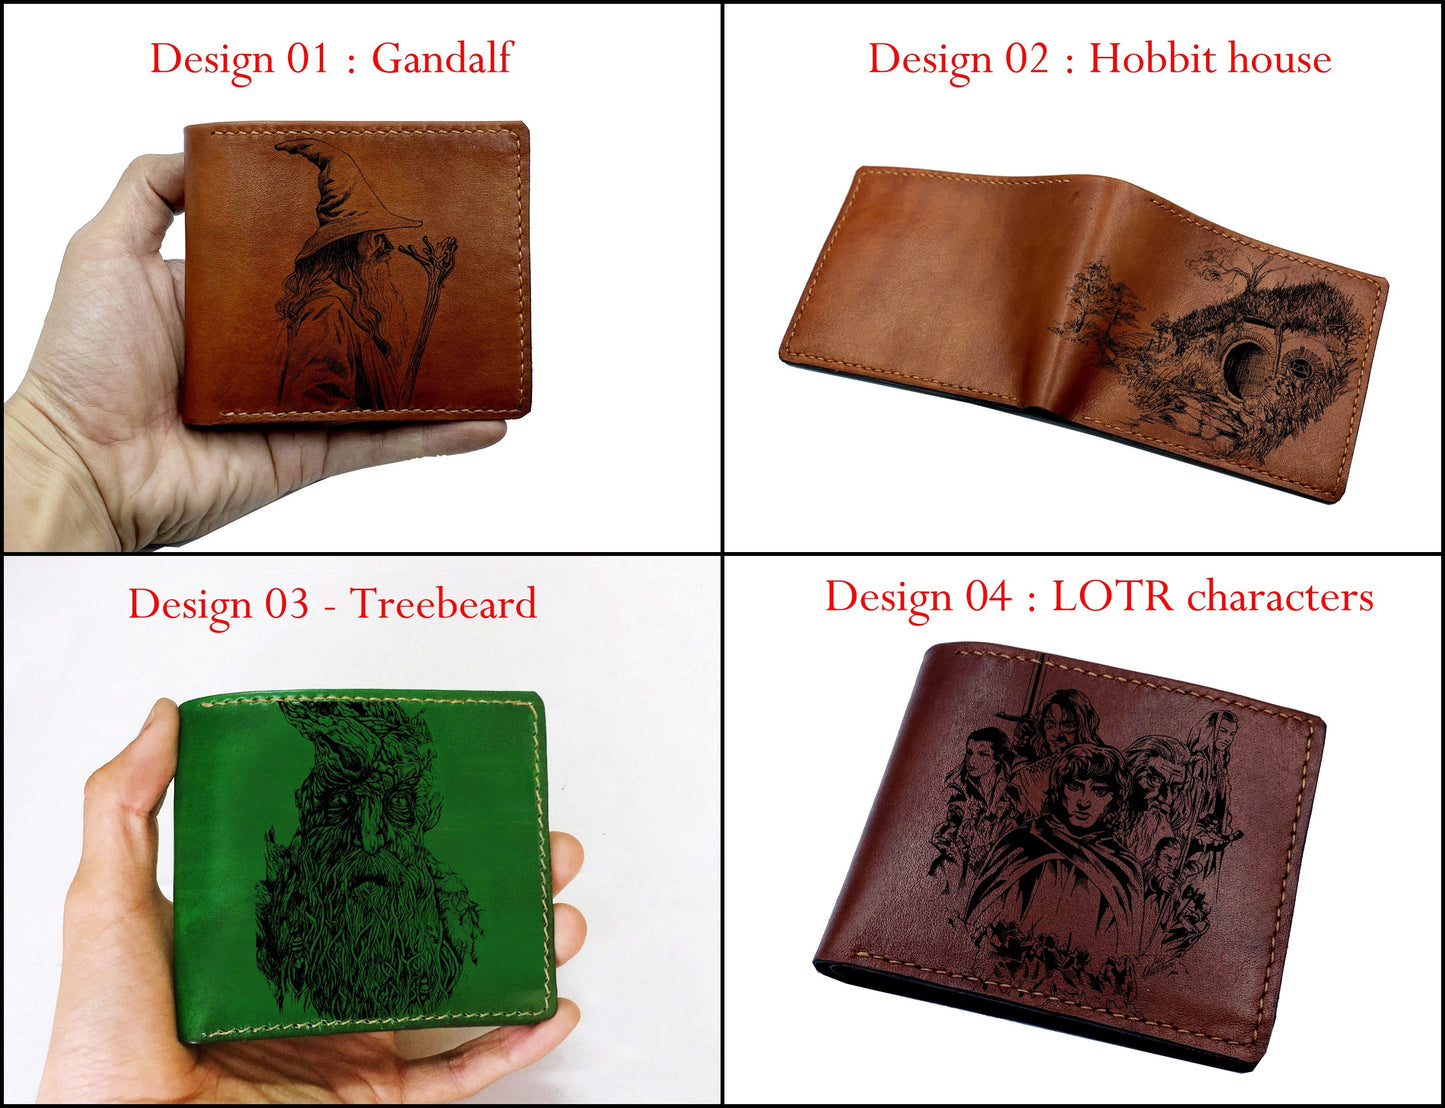 Mayan Corner - The Lord of the Rings leather handmade wallet, Gandalf the White wizard leather wallet, LOTR leather anniversary gift idea for husband, father, brother